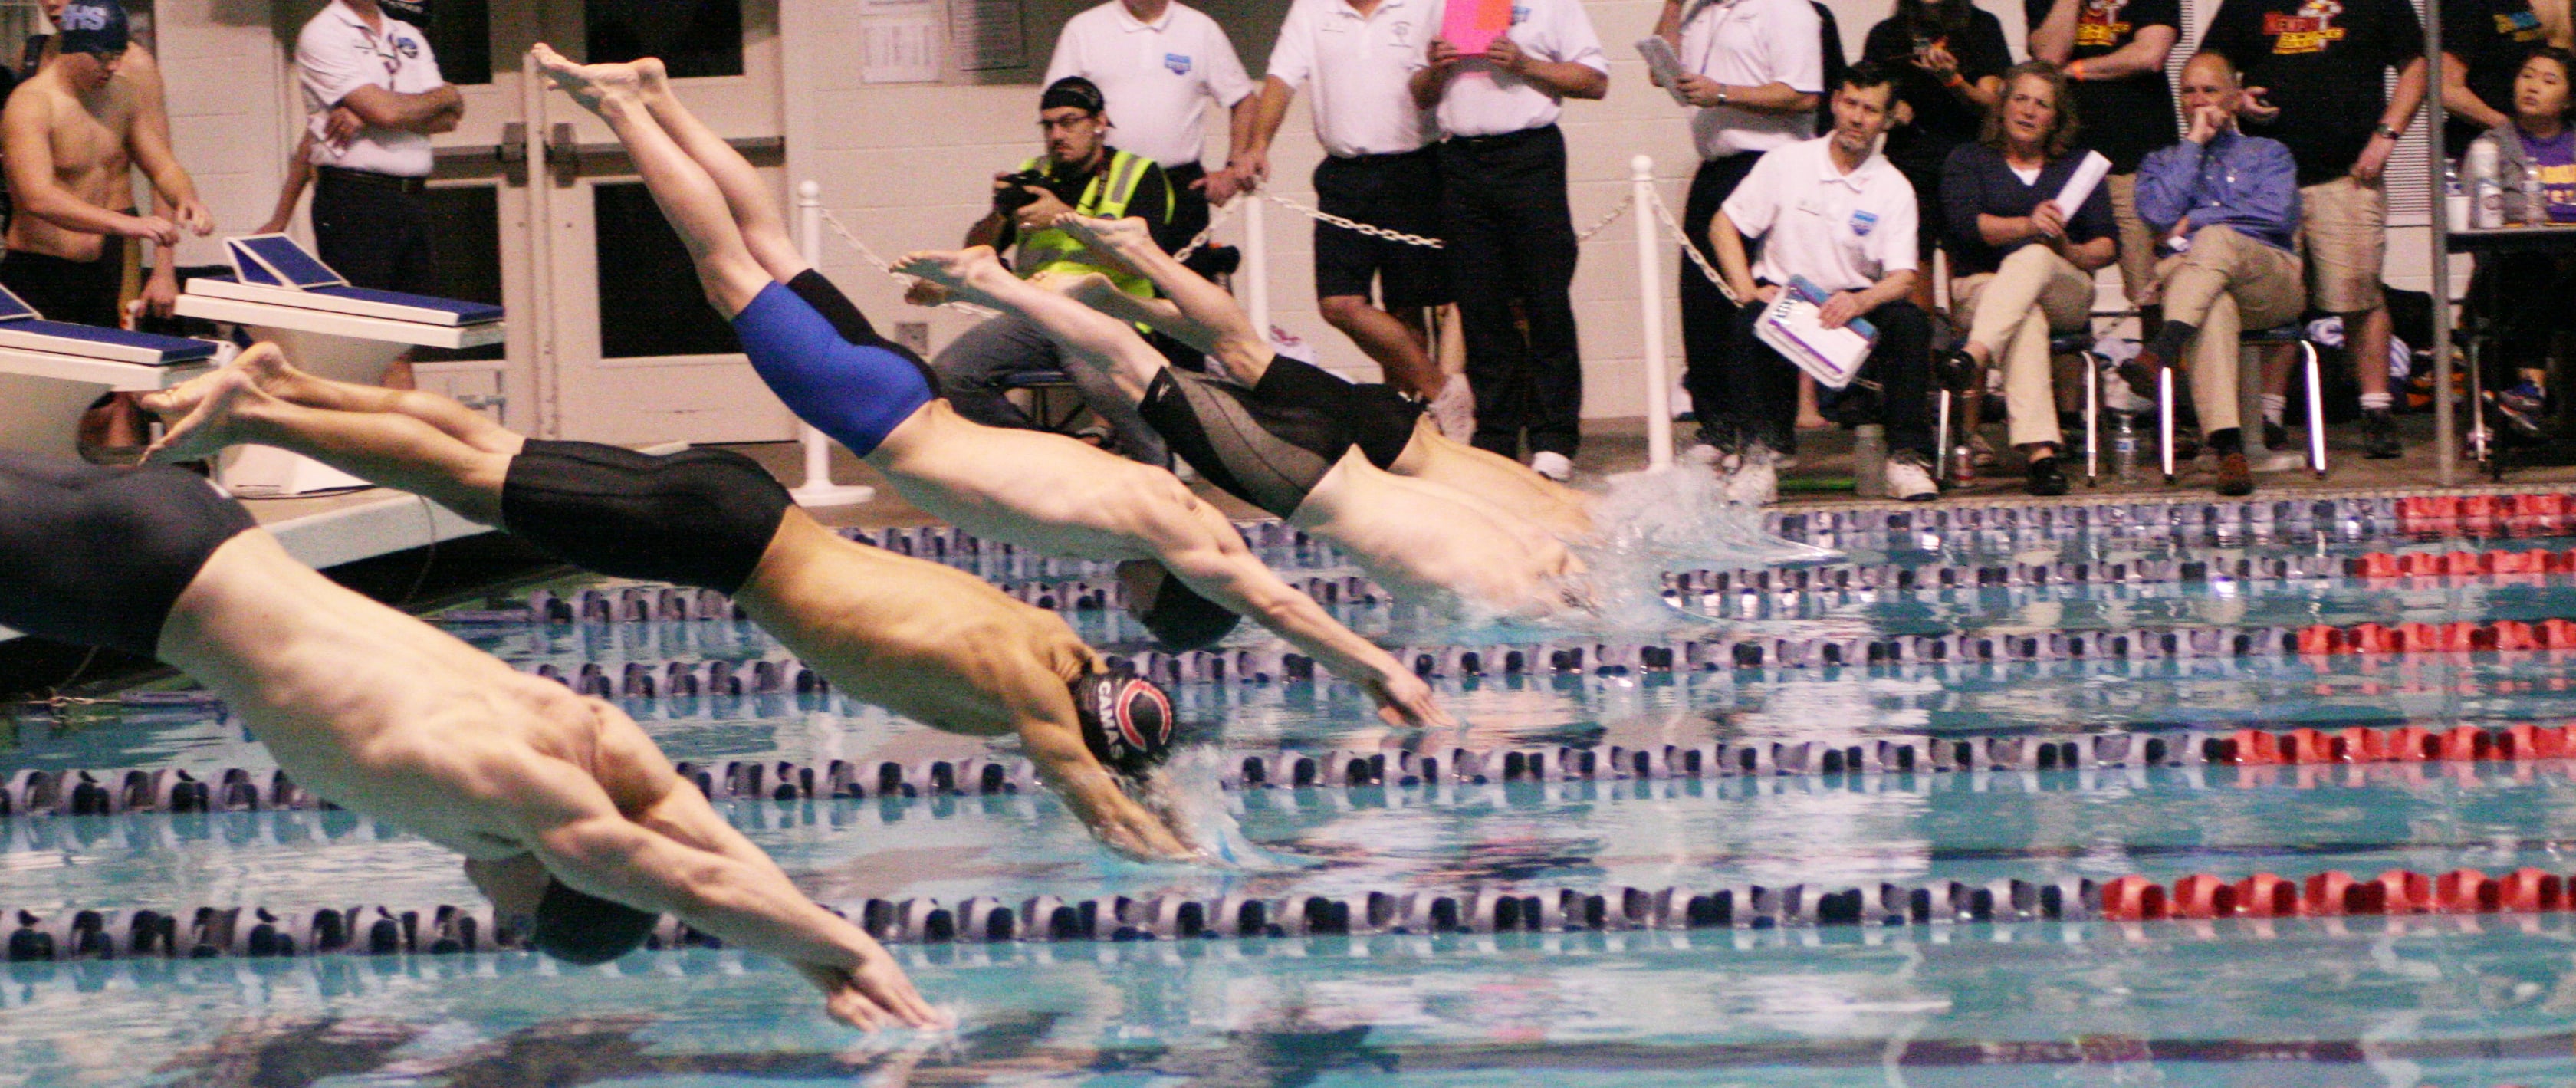 John Utas dives in with the other swimmers to begin the 200 freestyle relay preliminary race.